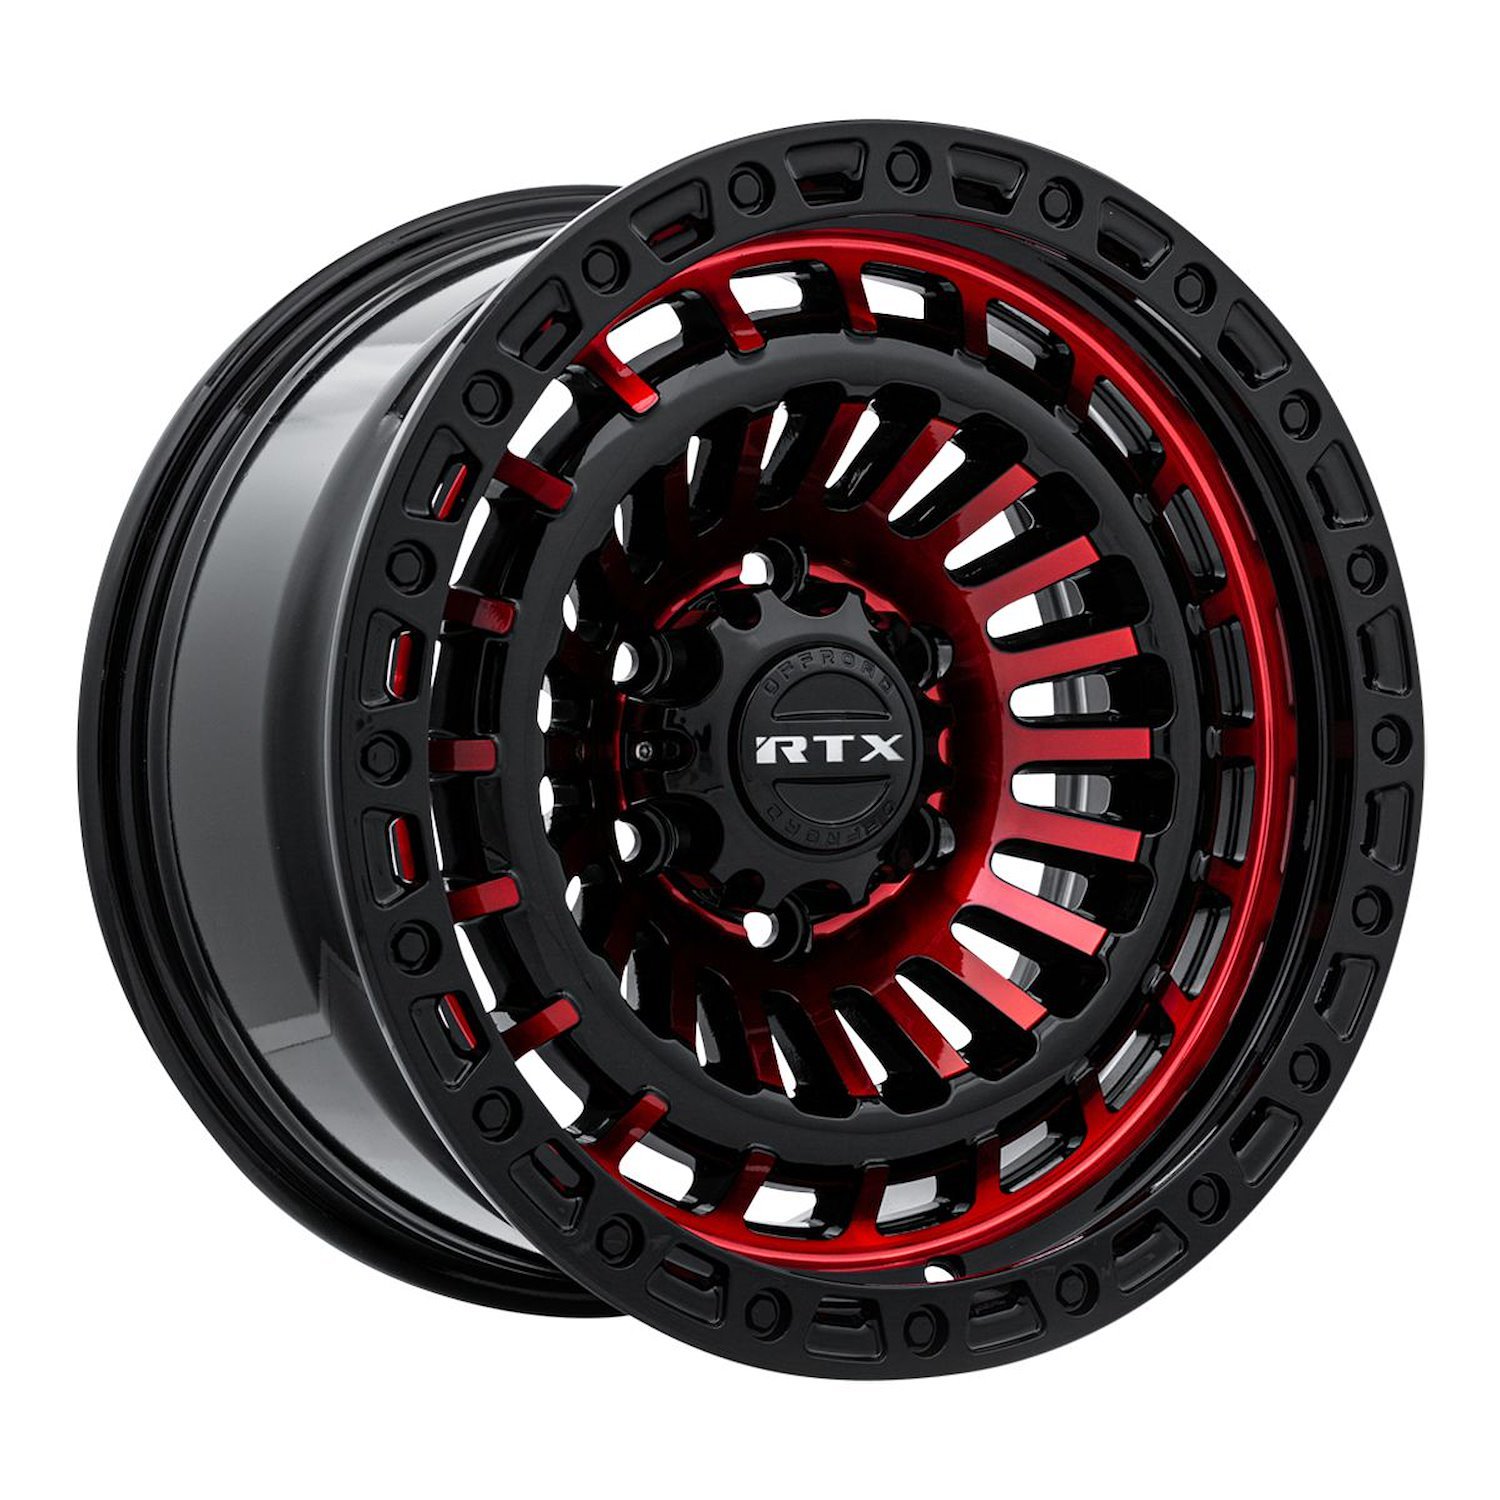 083094 Off-Road Series Moab Wheel [Size: 18" x 9"] Gloss Black Machined Red Lip Finish